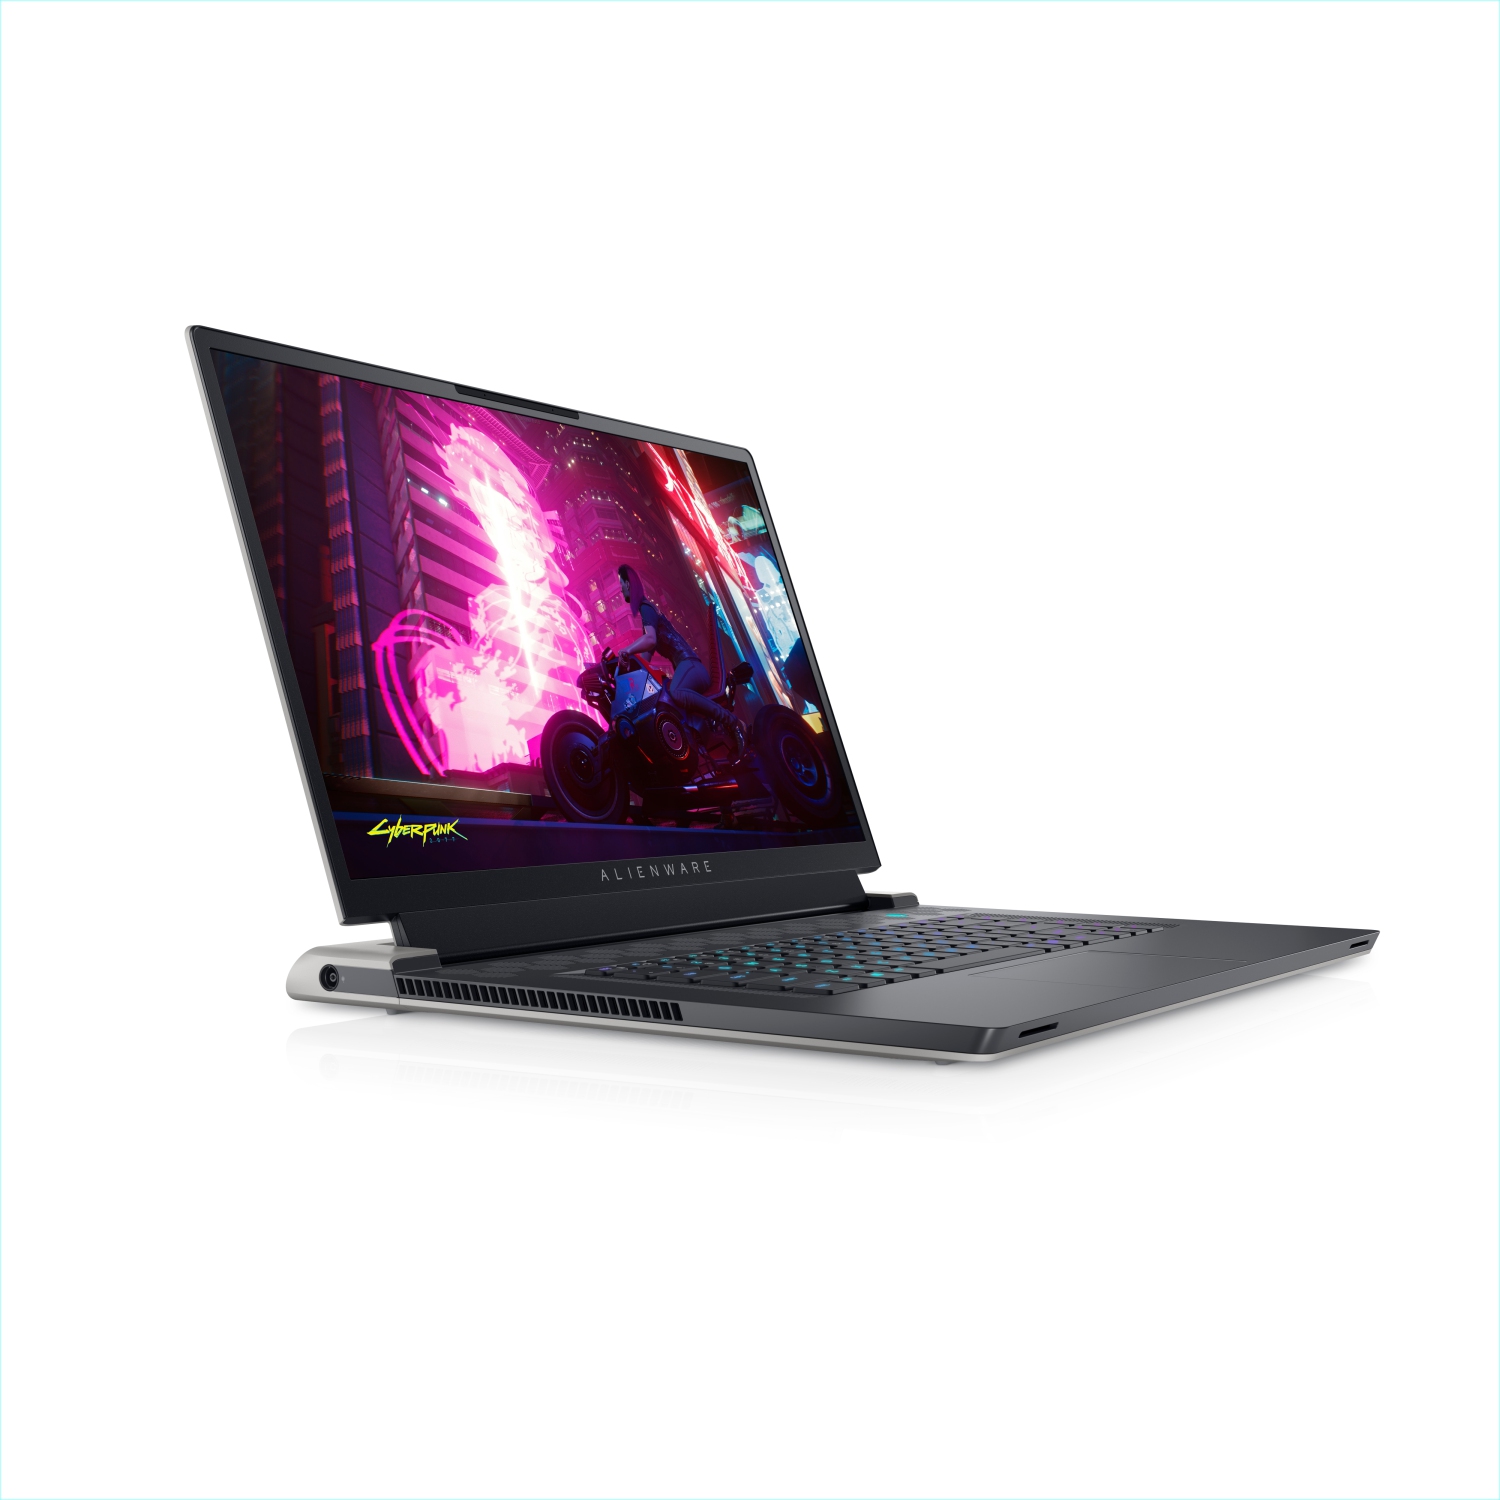 Refurbished (Excellent) - Dell Alienware X17 R1 Gaming Laptop (2021), 17.3" 4K, Core i7, 1TB SSD + 512GB SSD, 32GB RAM, RTX 3060, 4.6 GHz, 11th Gen CPU Certified